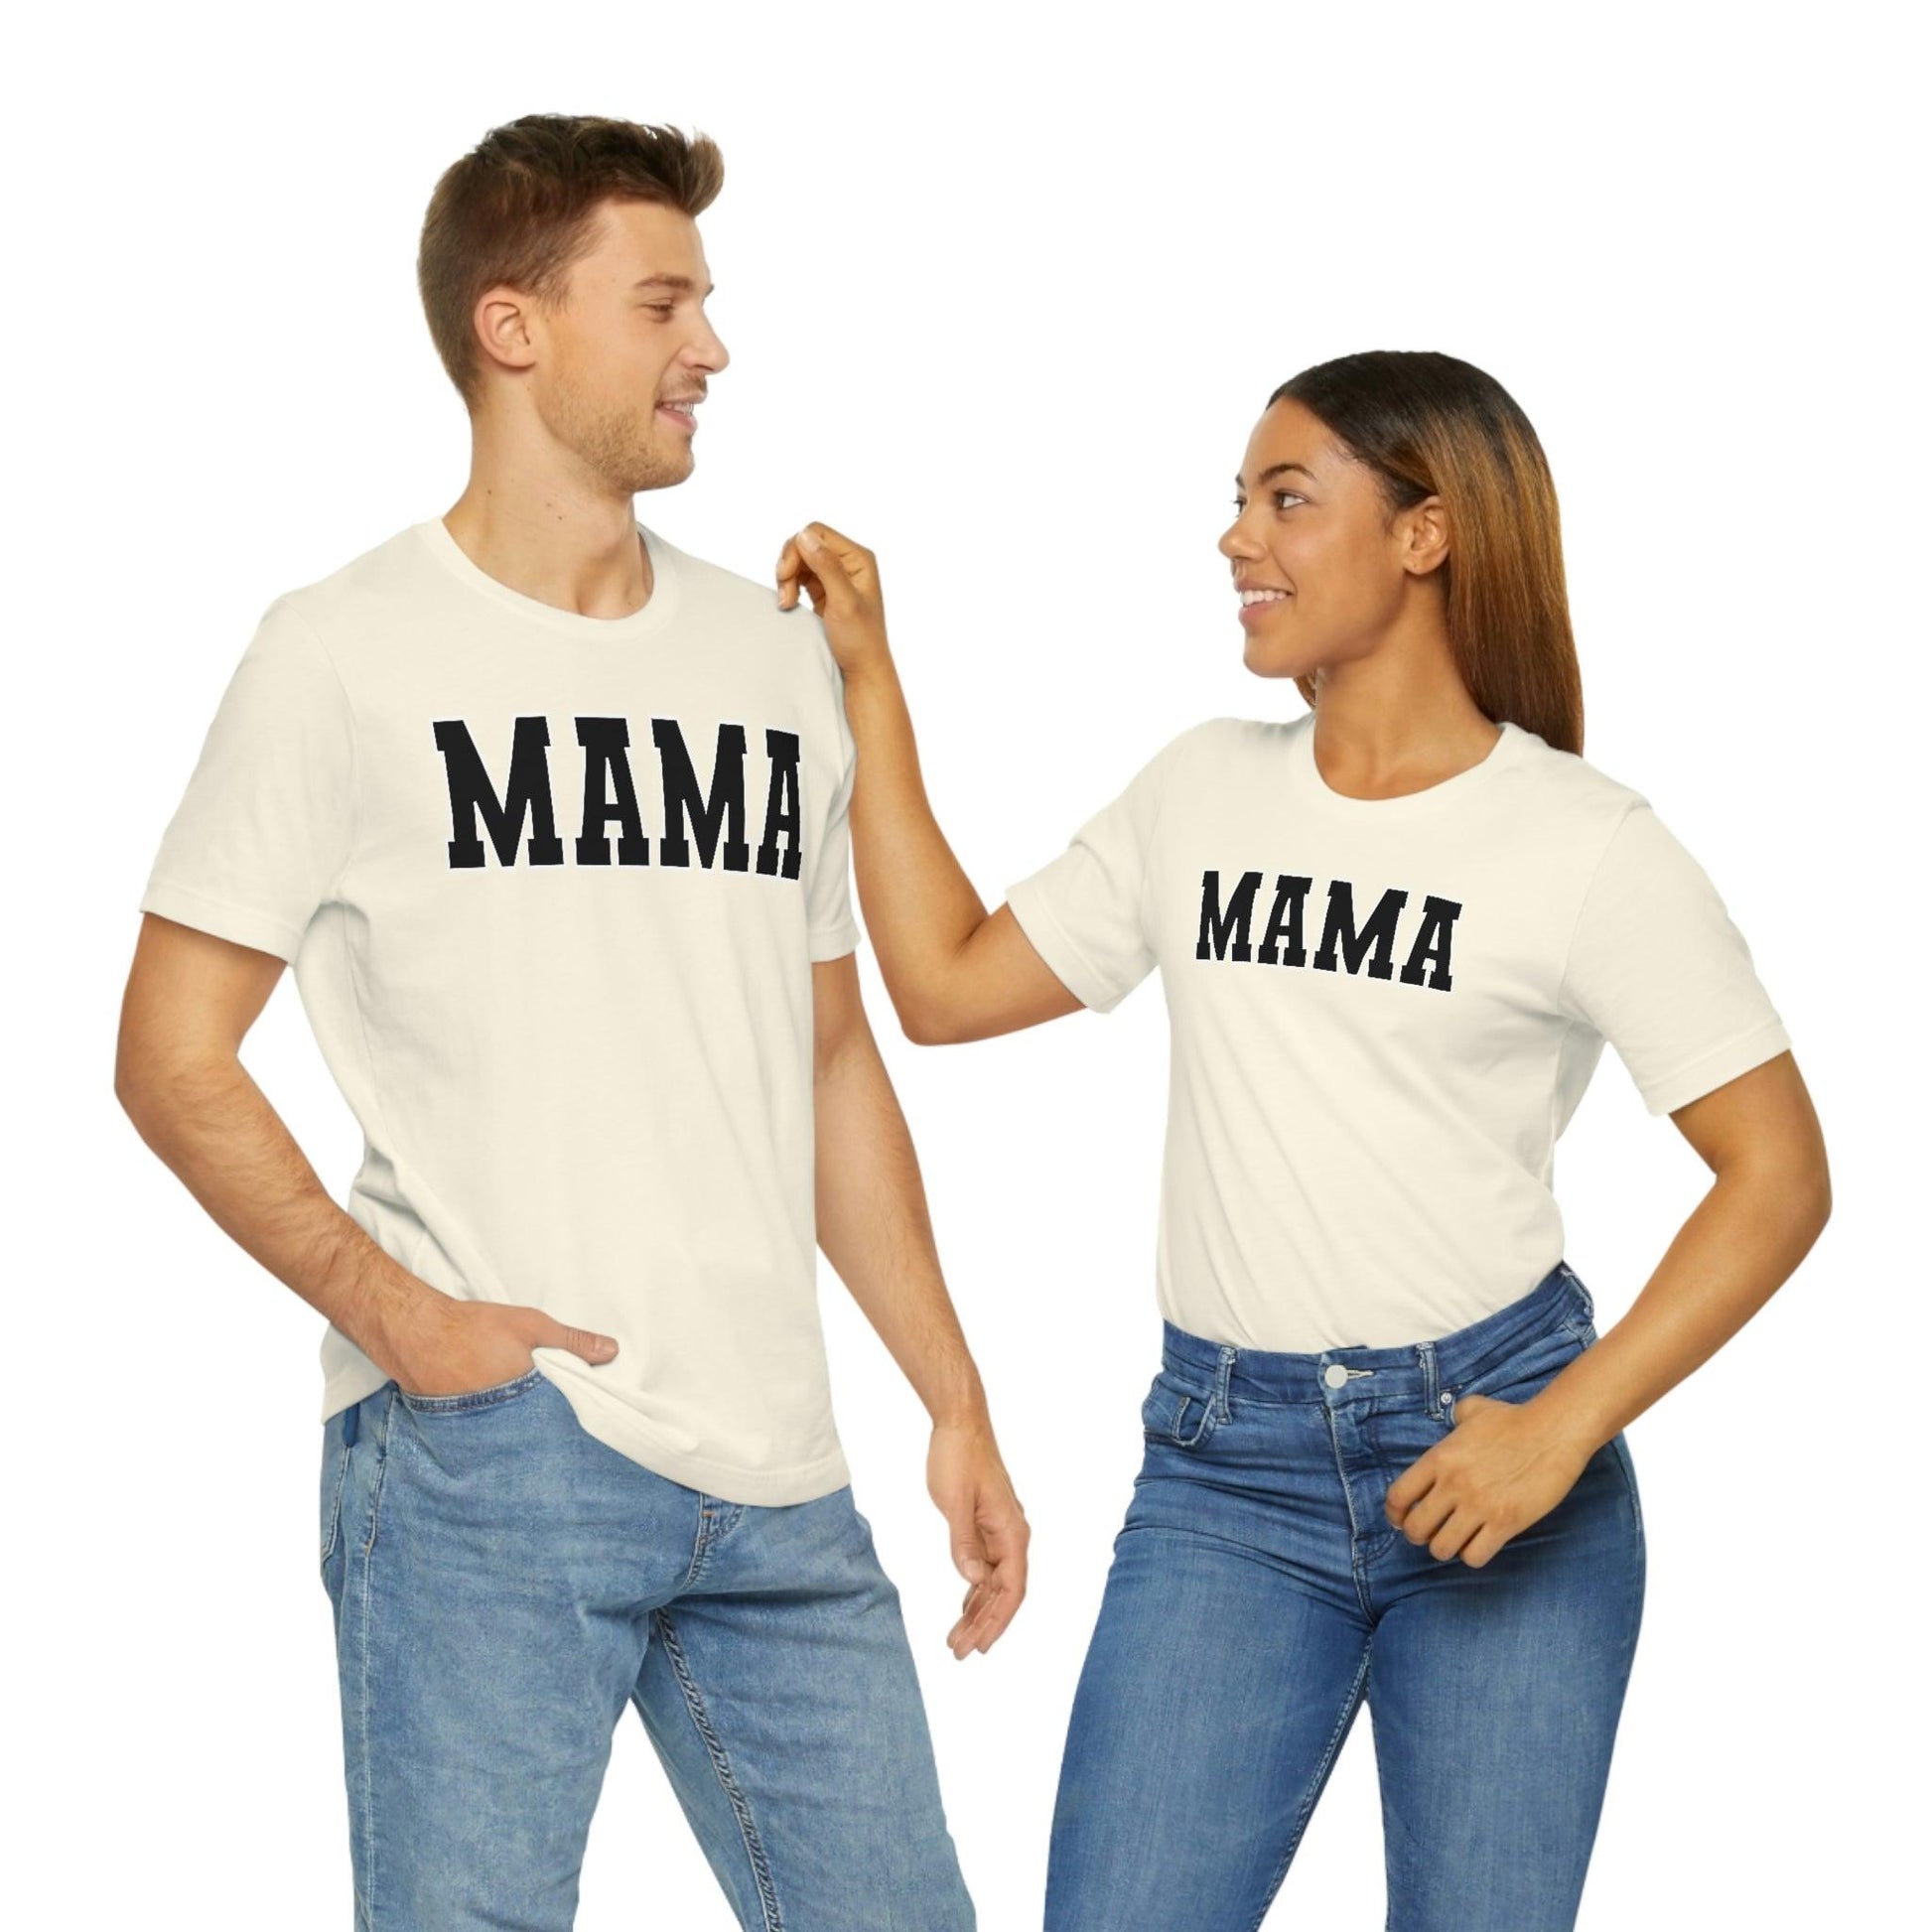 Cute Mama shirt mom shirt gift for her - mothers day shirt mothers day gift mom life shirt - retro mama shirt boy mama shirt mama t-shirt - Giftsmojo